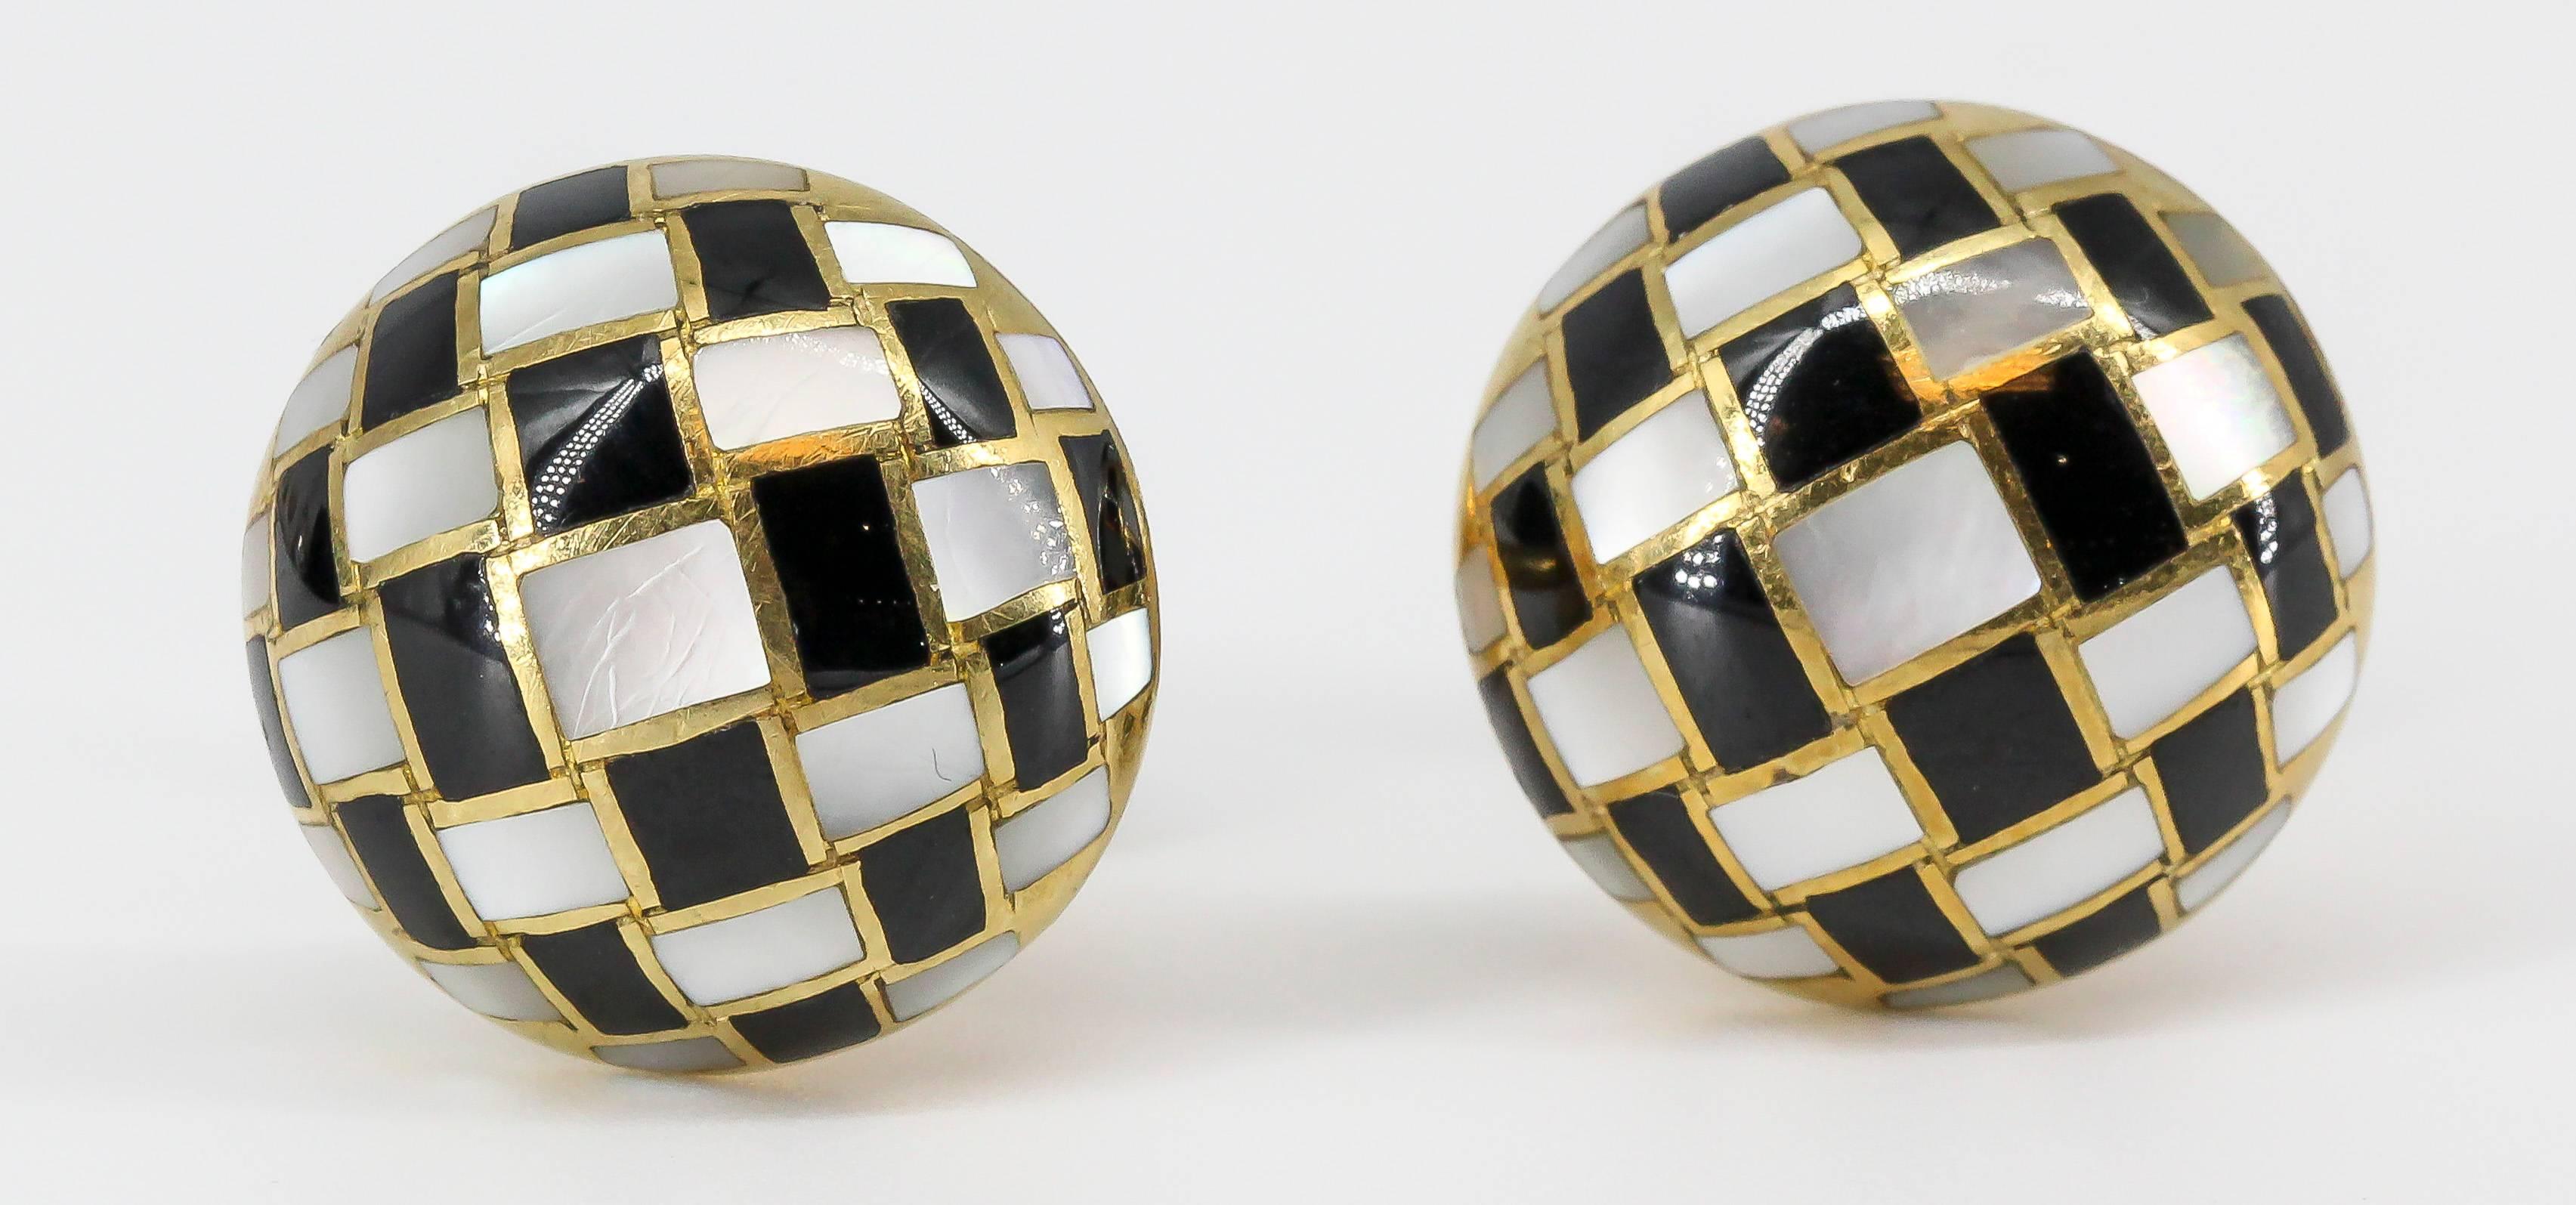 Handsome inlaid black jade and mother of pearl over 18K yellow gold cufflinks by Tiffany & Co., designed by Angela Cummings. They feature a round button style design with checkered style inlaid jade and mother of pearl. 

Hallmarks: Tiffany & Co,